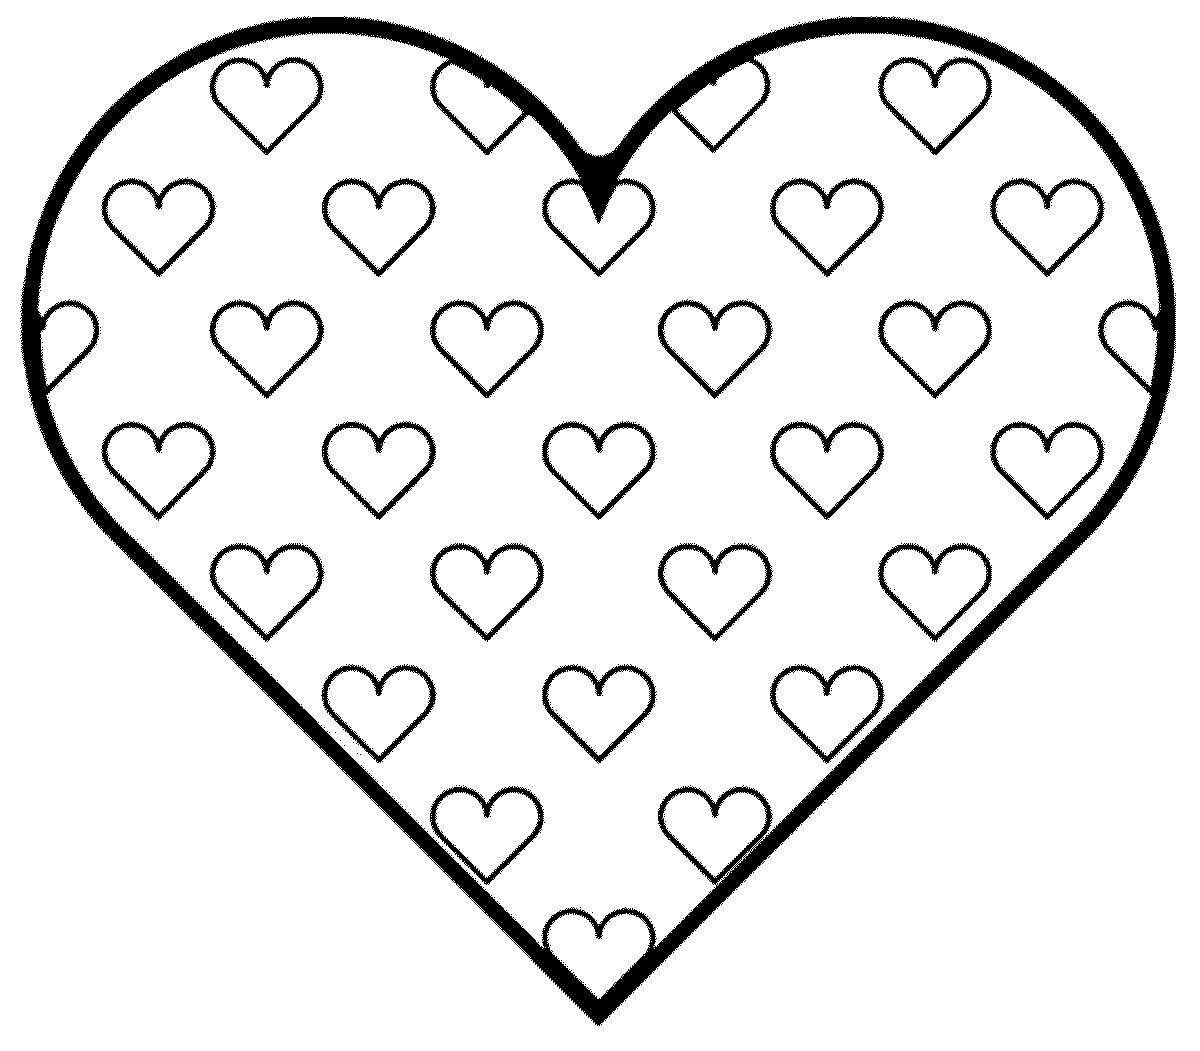 Coloring page lot with cascading heart